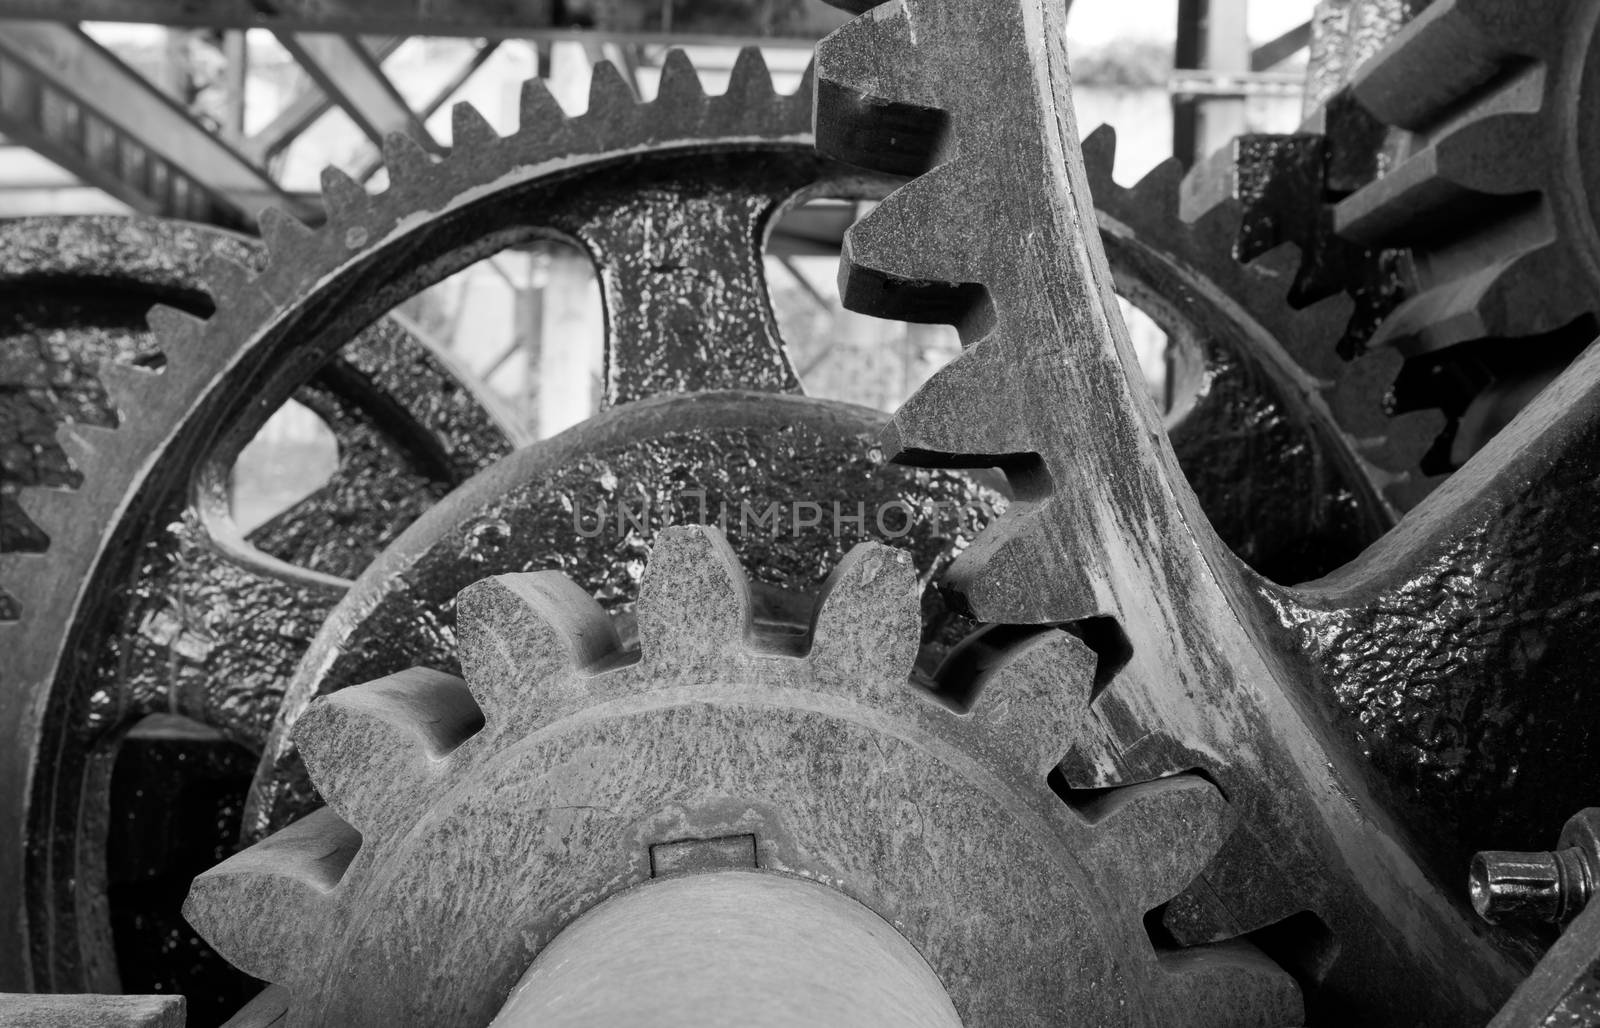 These gears were once used to operate a nautical waterway bridge